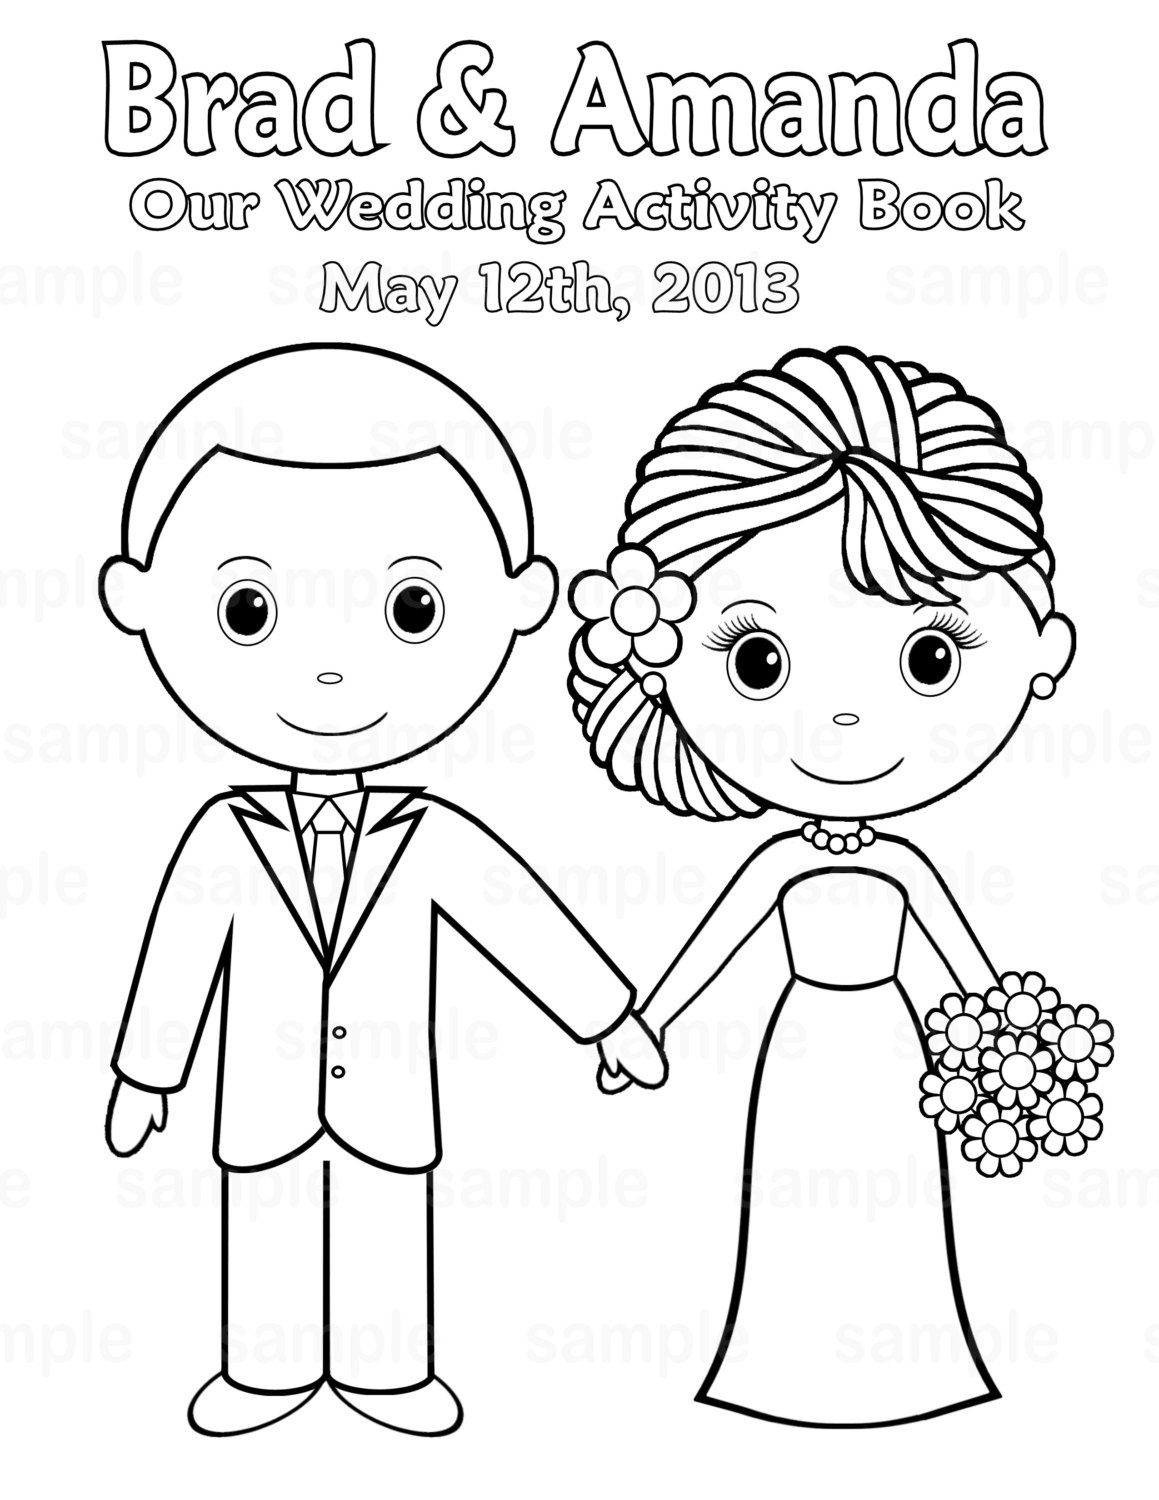 Free Printable Coloring Pictures Wedding | Printable Personalized - Free Printable Personalized Wedding Coloring Book